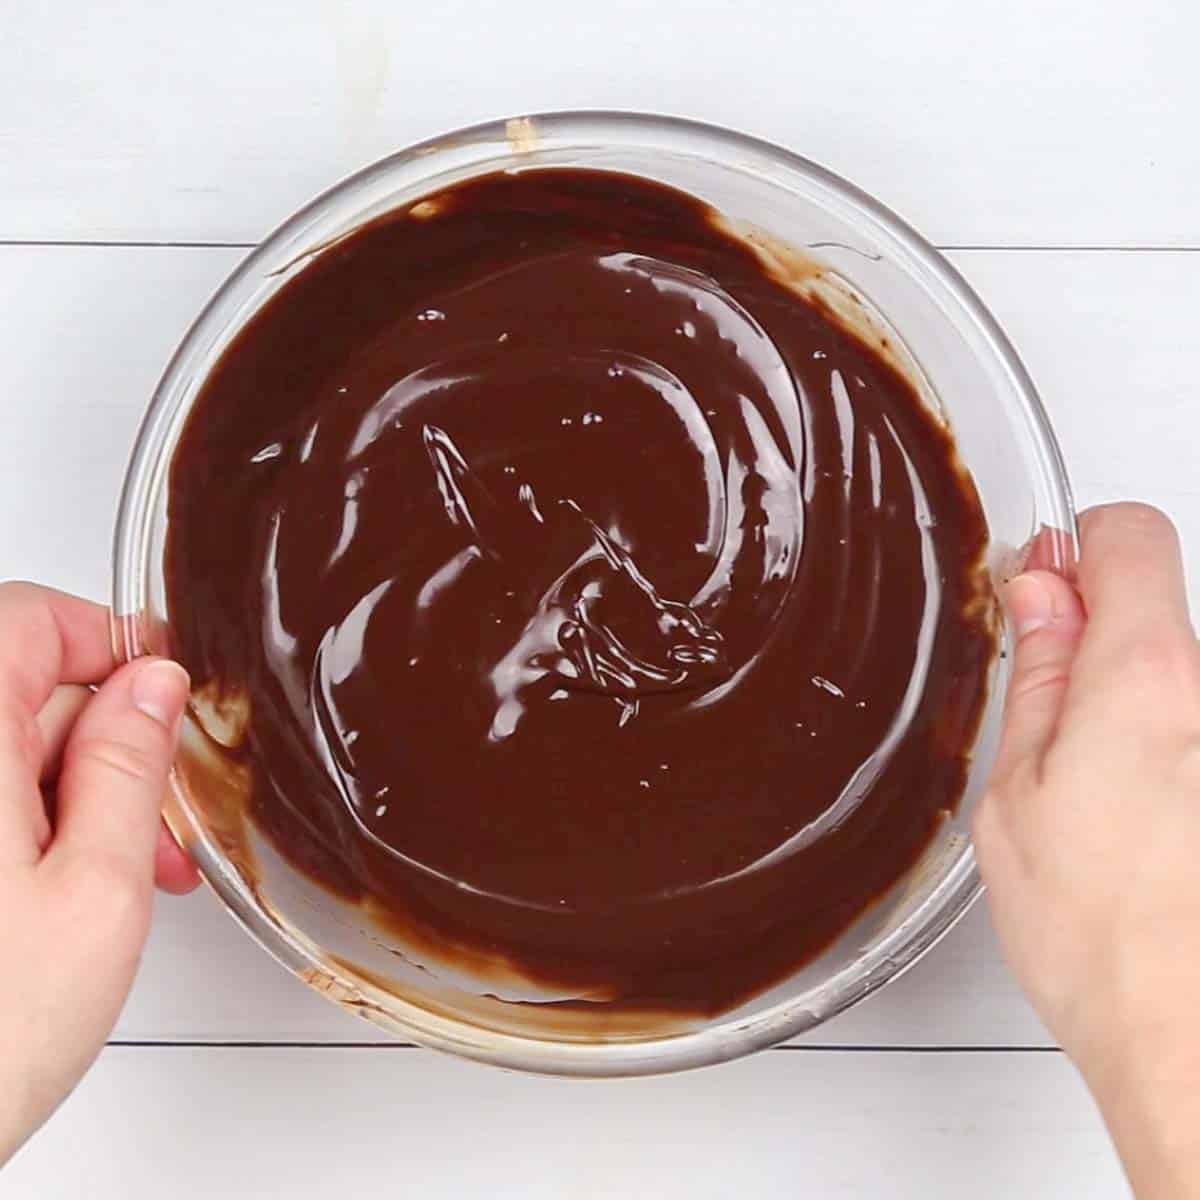 chocolate into a glass bowl to pour on a brownie cake